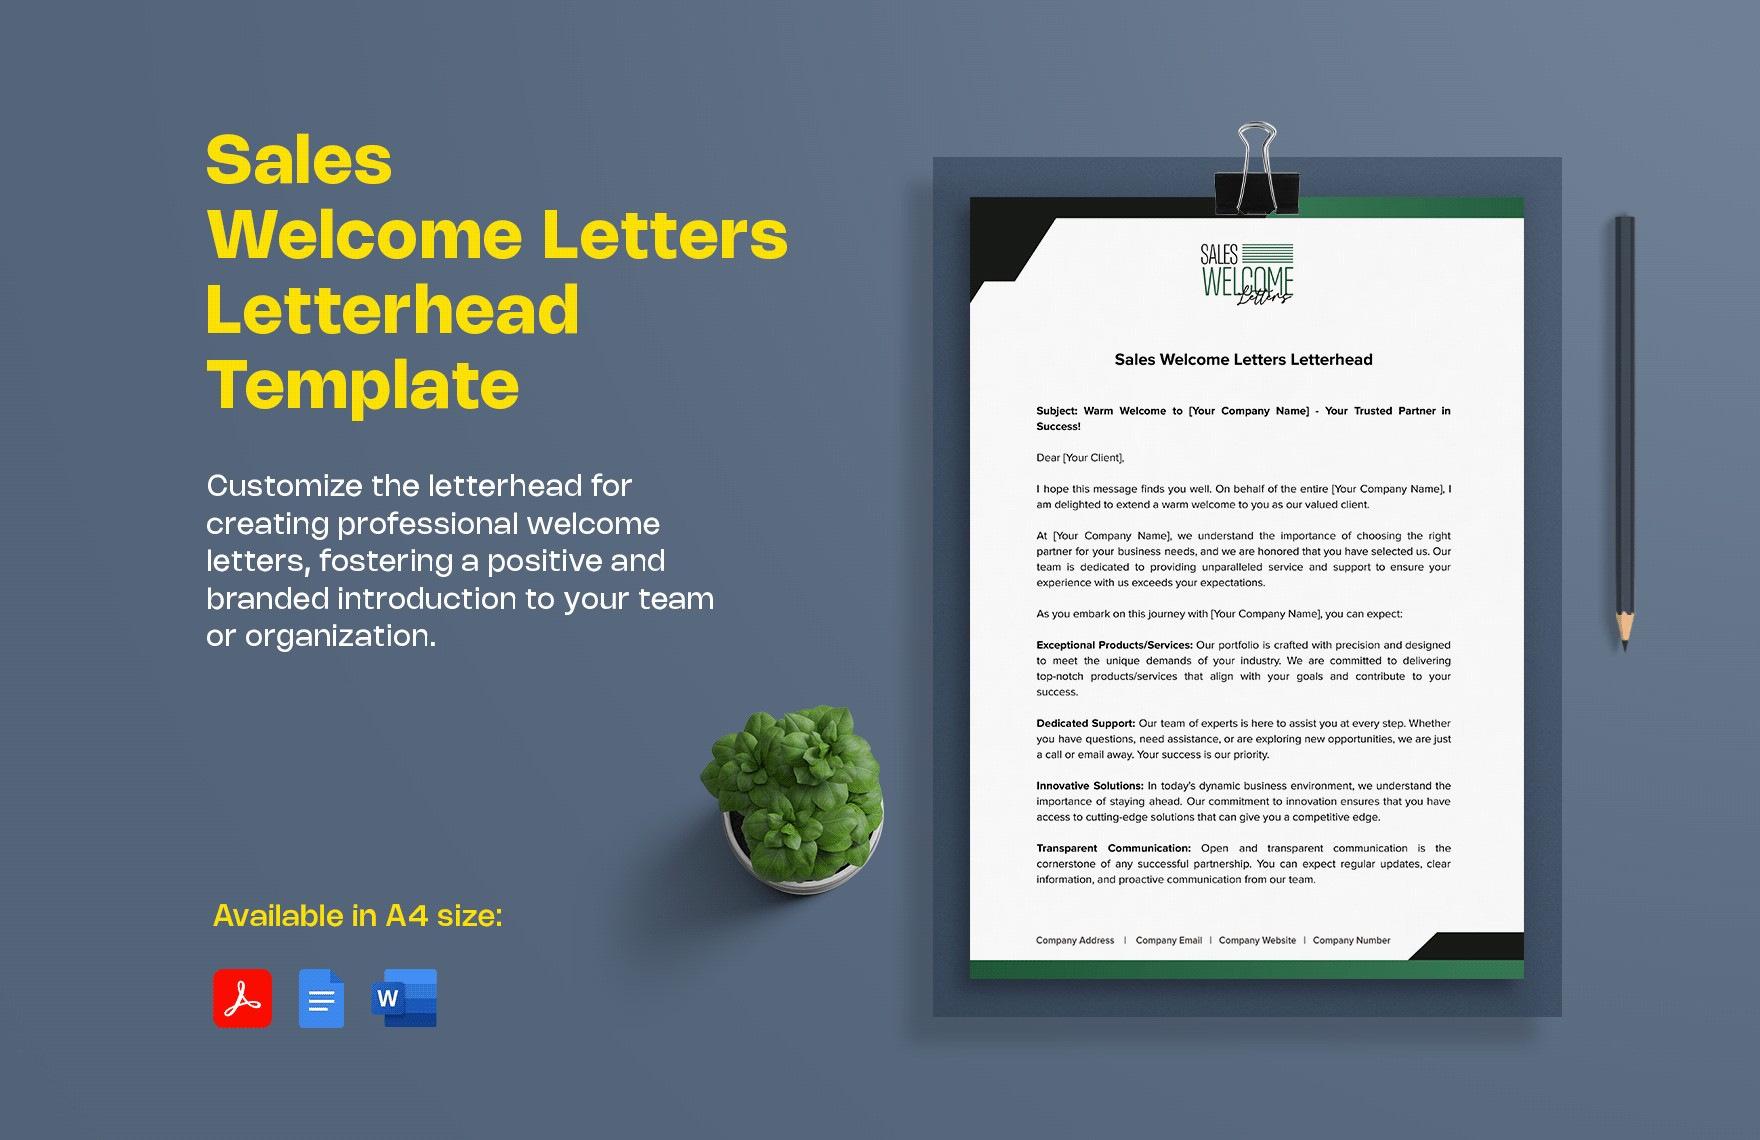 Sales Welcome Letters Letterhead Template